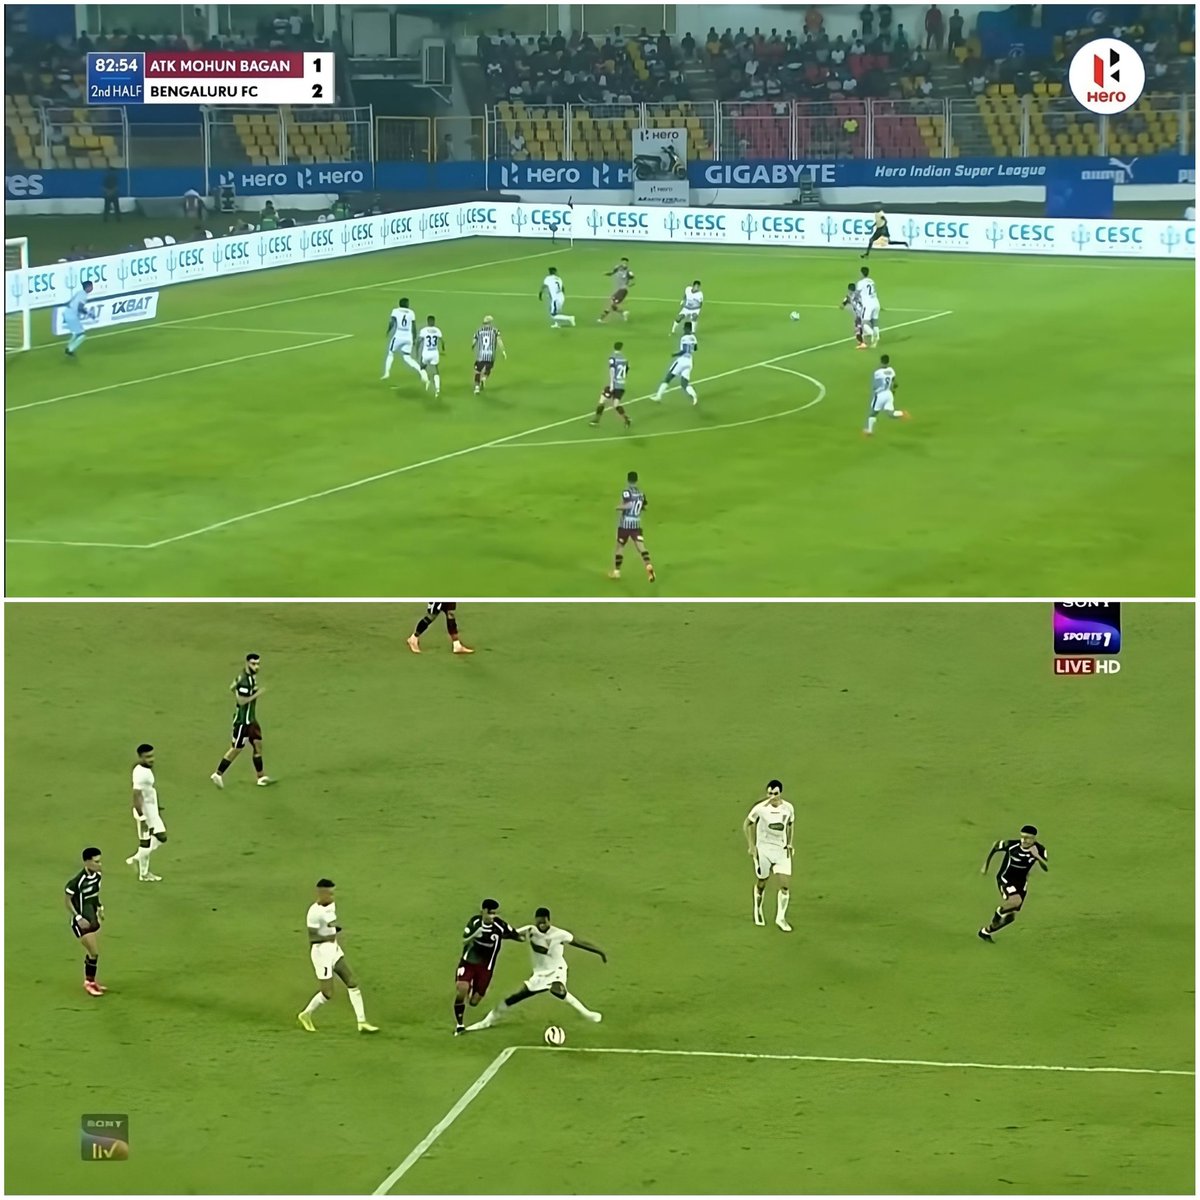 BFC were robbed in ISL final

FCG got robbed in Durand Semis

Against a common opponent! 

At this rate just hand them a trophy! Why play games? 

#ISL #DurandCup